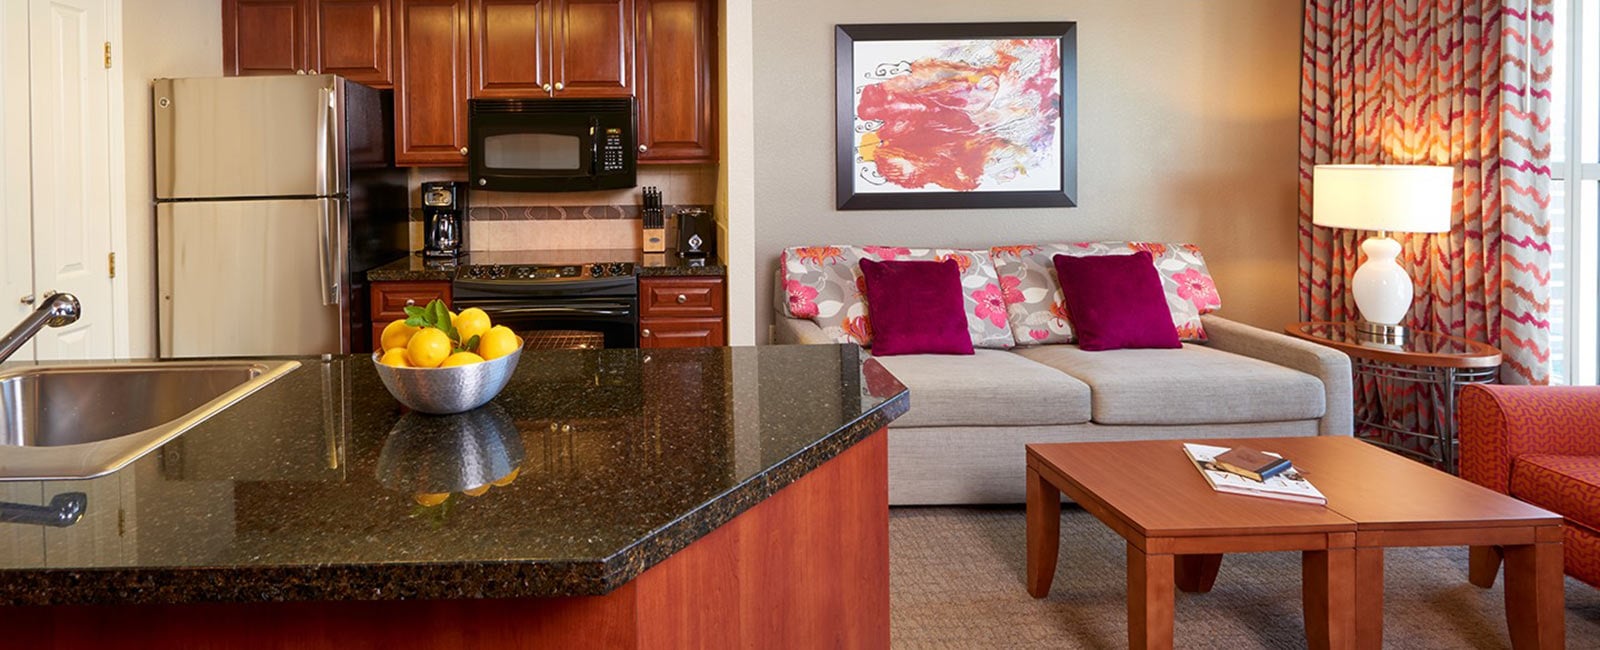 Living Area and Kitchen at the Flamingo Resort in Las Vegas, Nevada